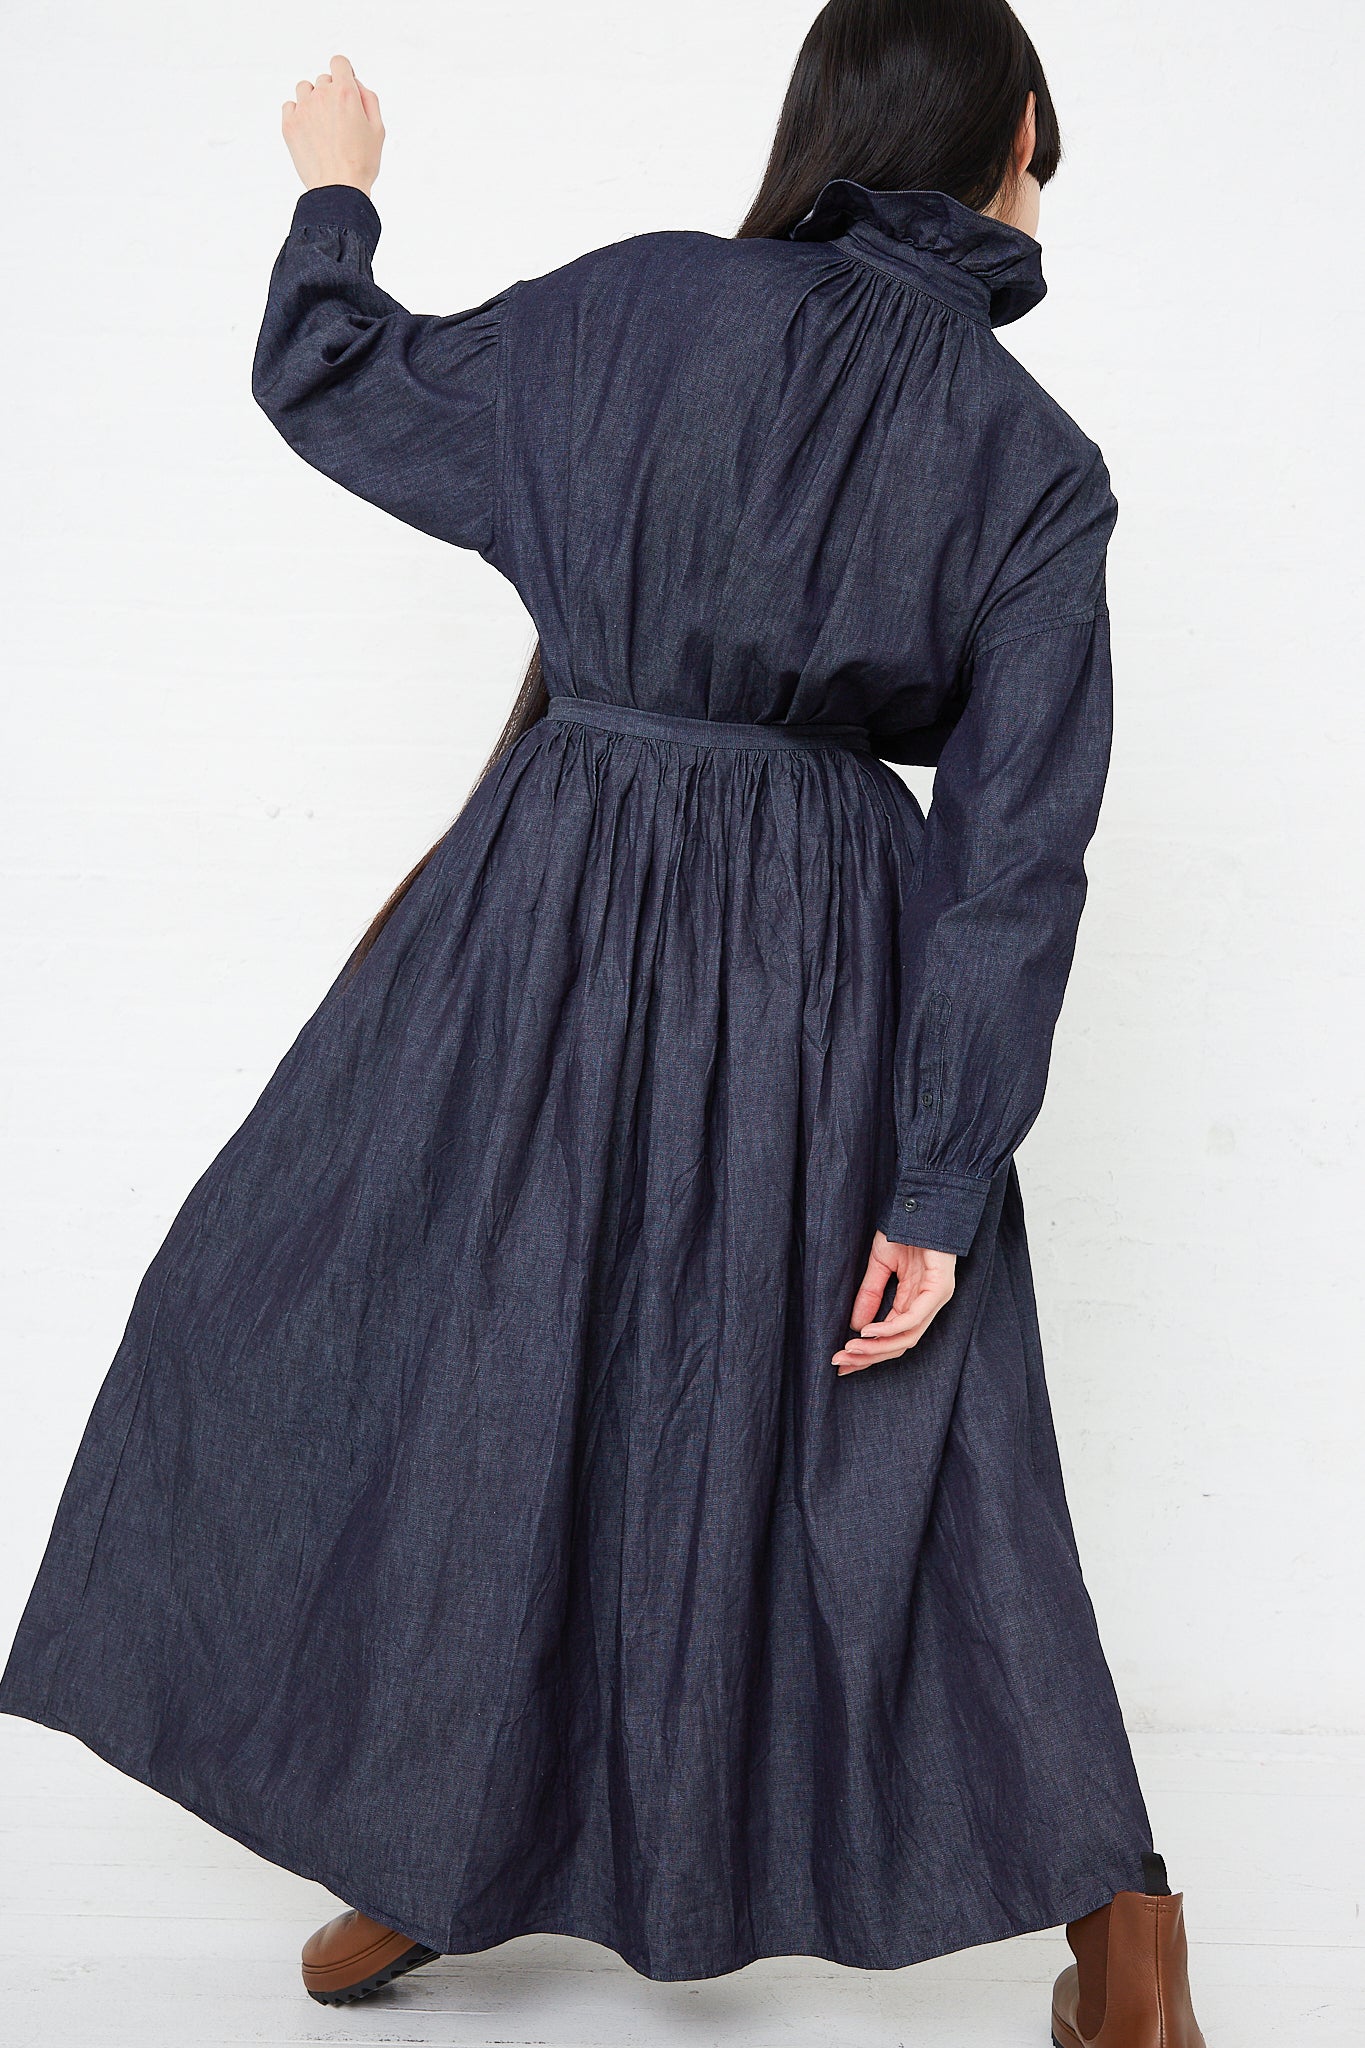 The back of a woman wearing a long Toujours Cotton Denim Cloth Pleated Maxi Skirt in Indigo, made from organic cotton denim, featuring side seam pockets and an A-line skirt.